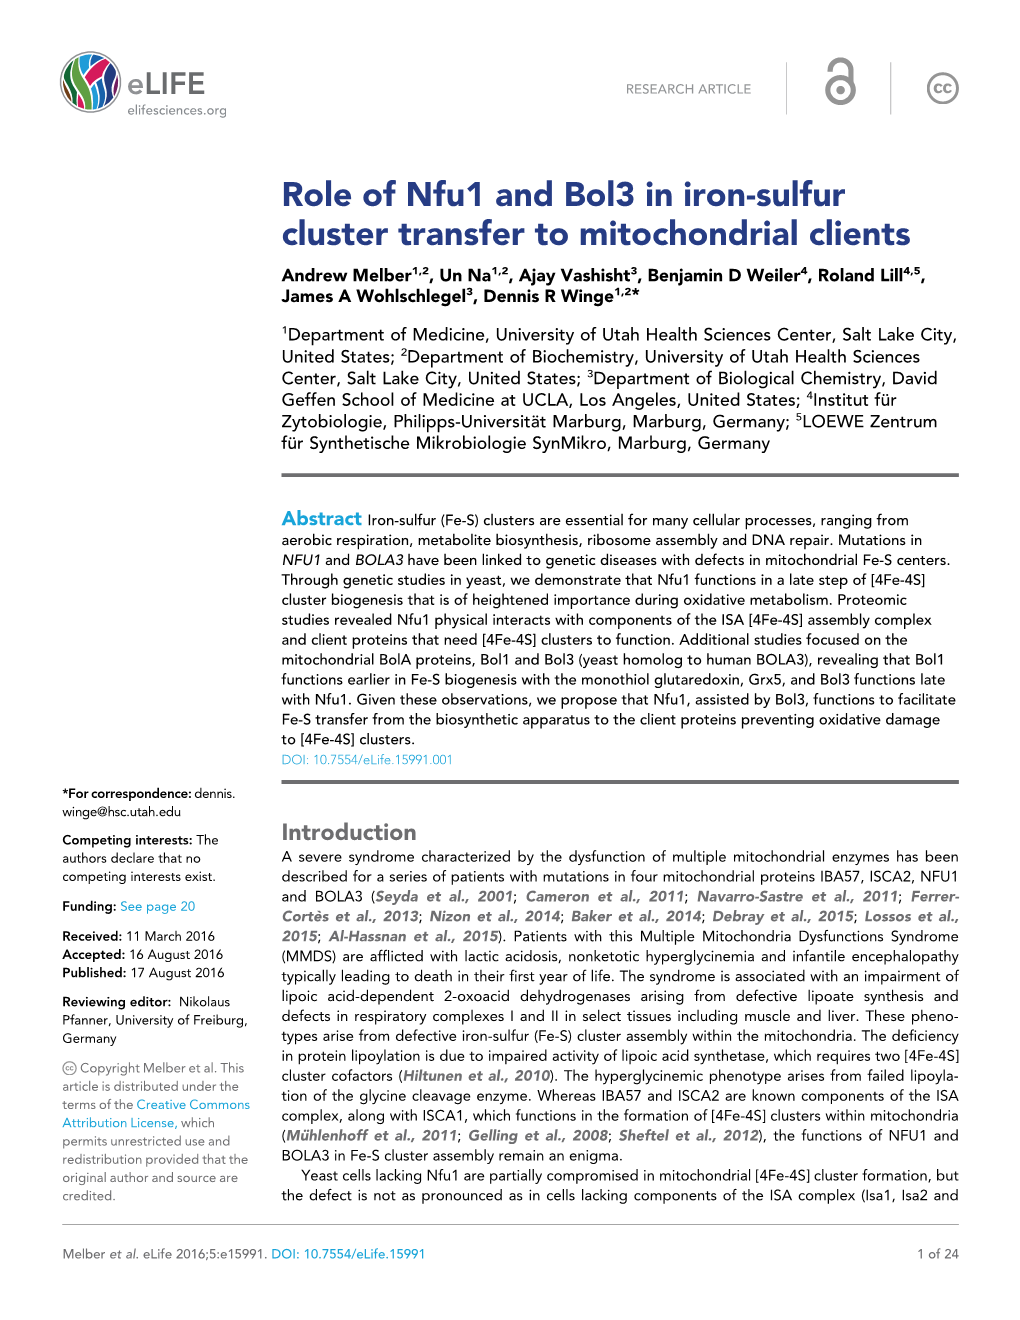 Role of Nfu1 and Bol3 in Iron-Sulfur Cluster Transfer to Mitochondrial Clients